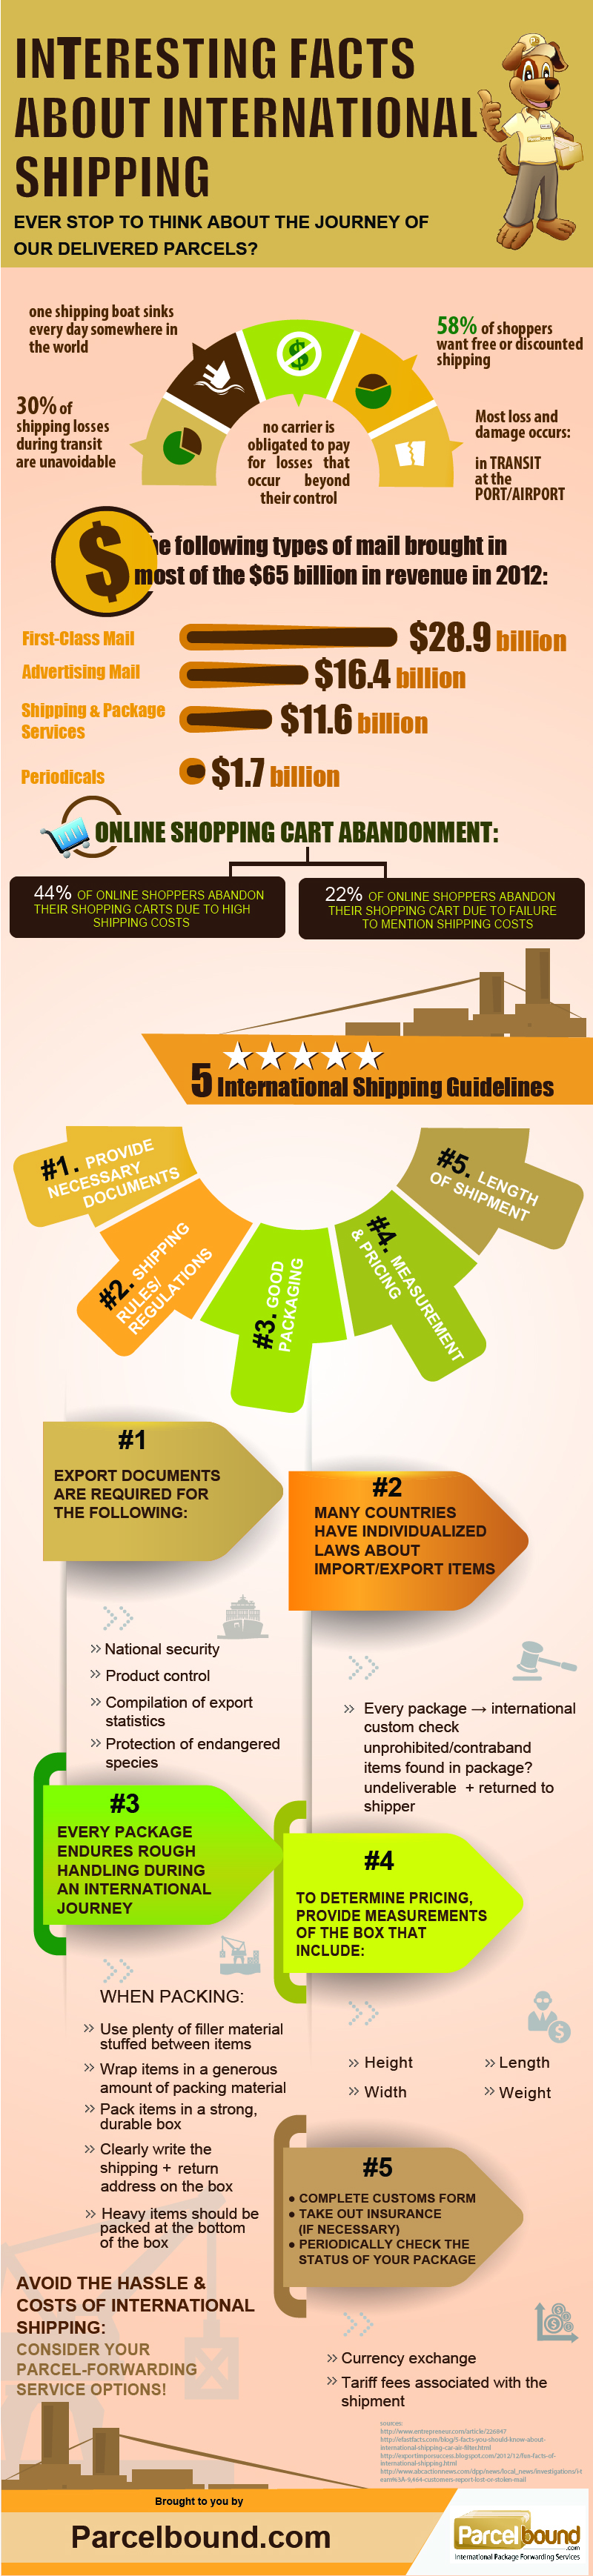 [Infographic] Interesting Facts About International Shipping